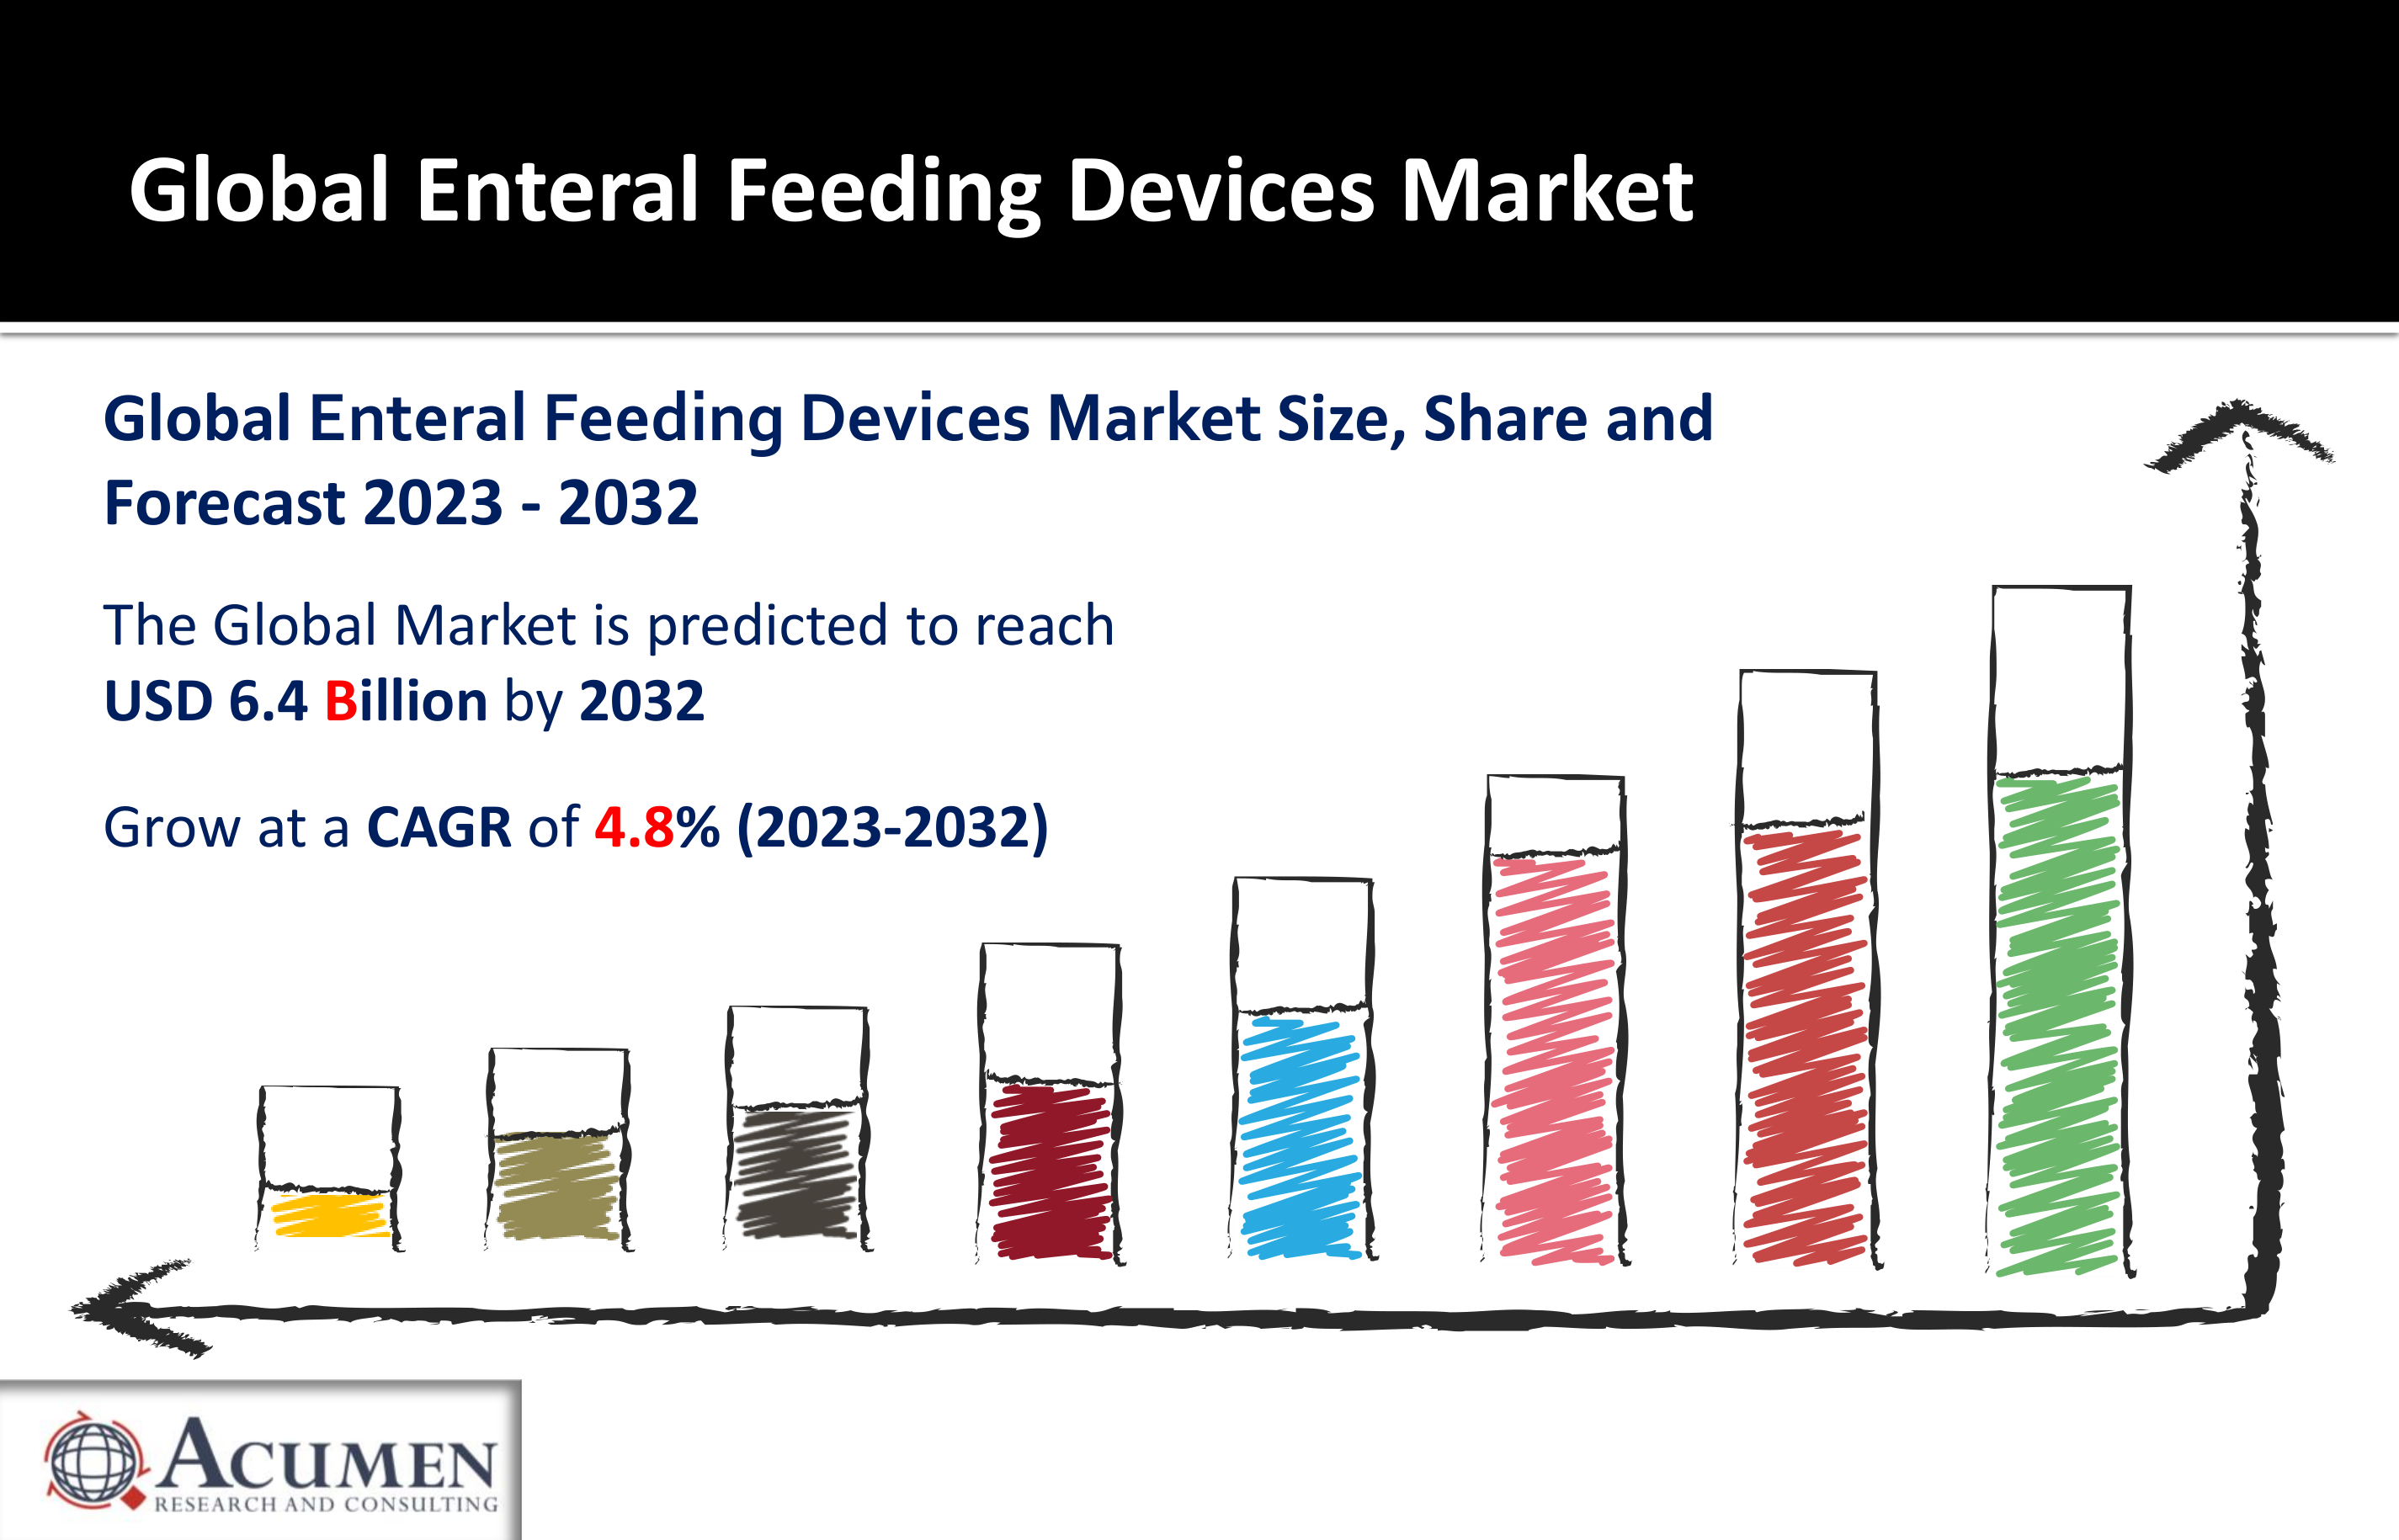 Enteral Feeding Devices Market Analysis, Size, Share, Growth, Trends and Forecast 2023-2032